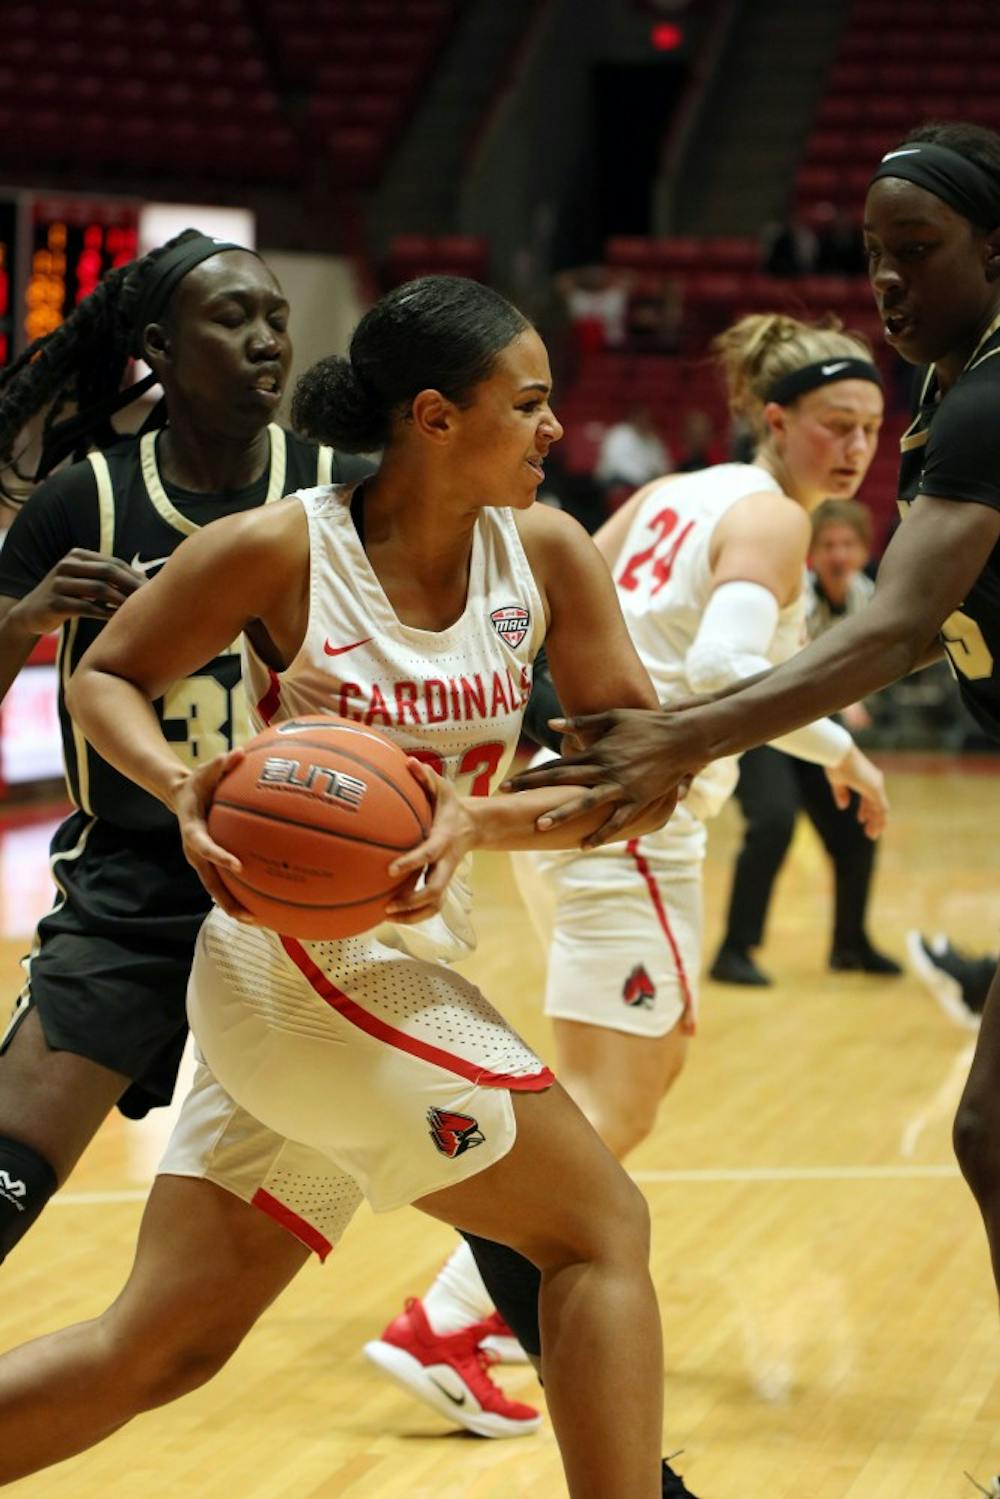 Ball State Women's Basketball grabs first win of season in nail-biter against Cleveland State